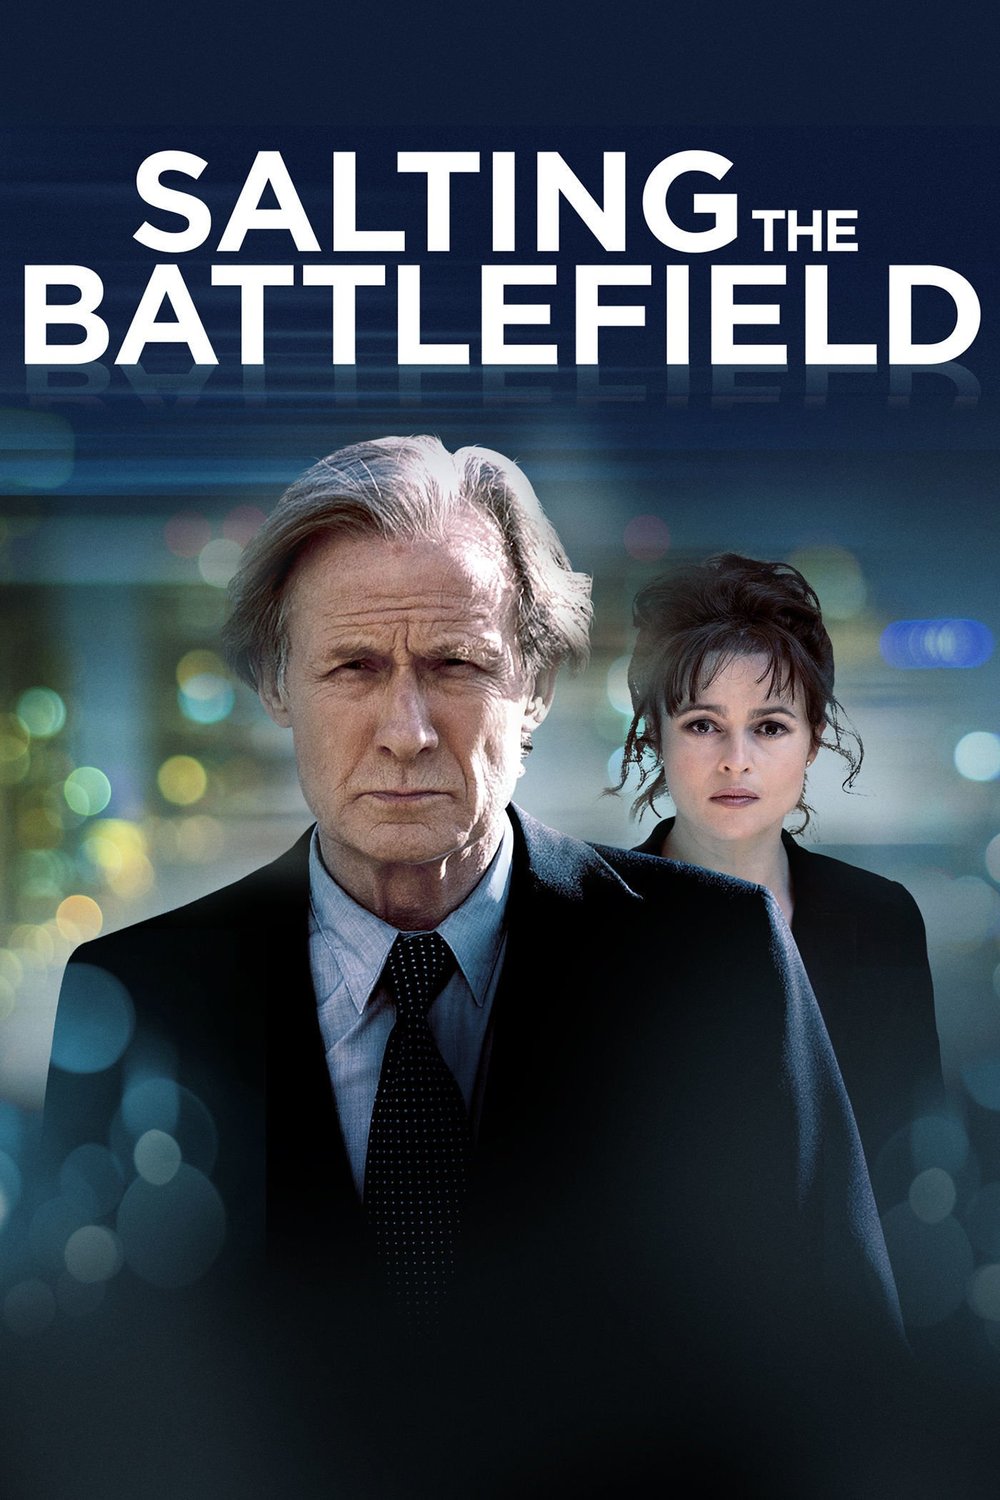 Poster of the movie Salting the Battlefield